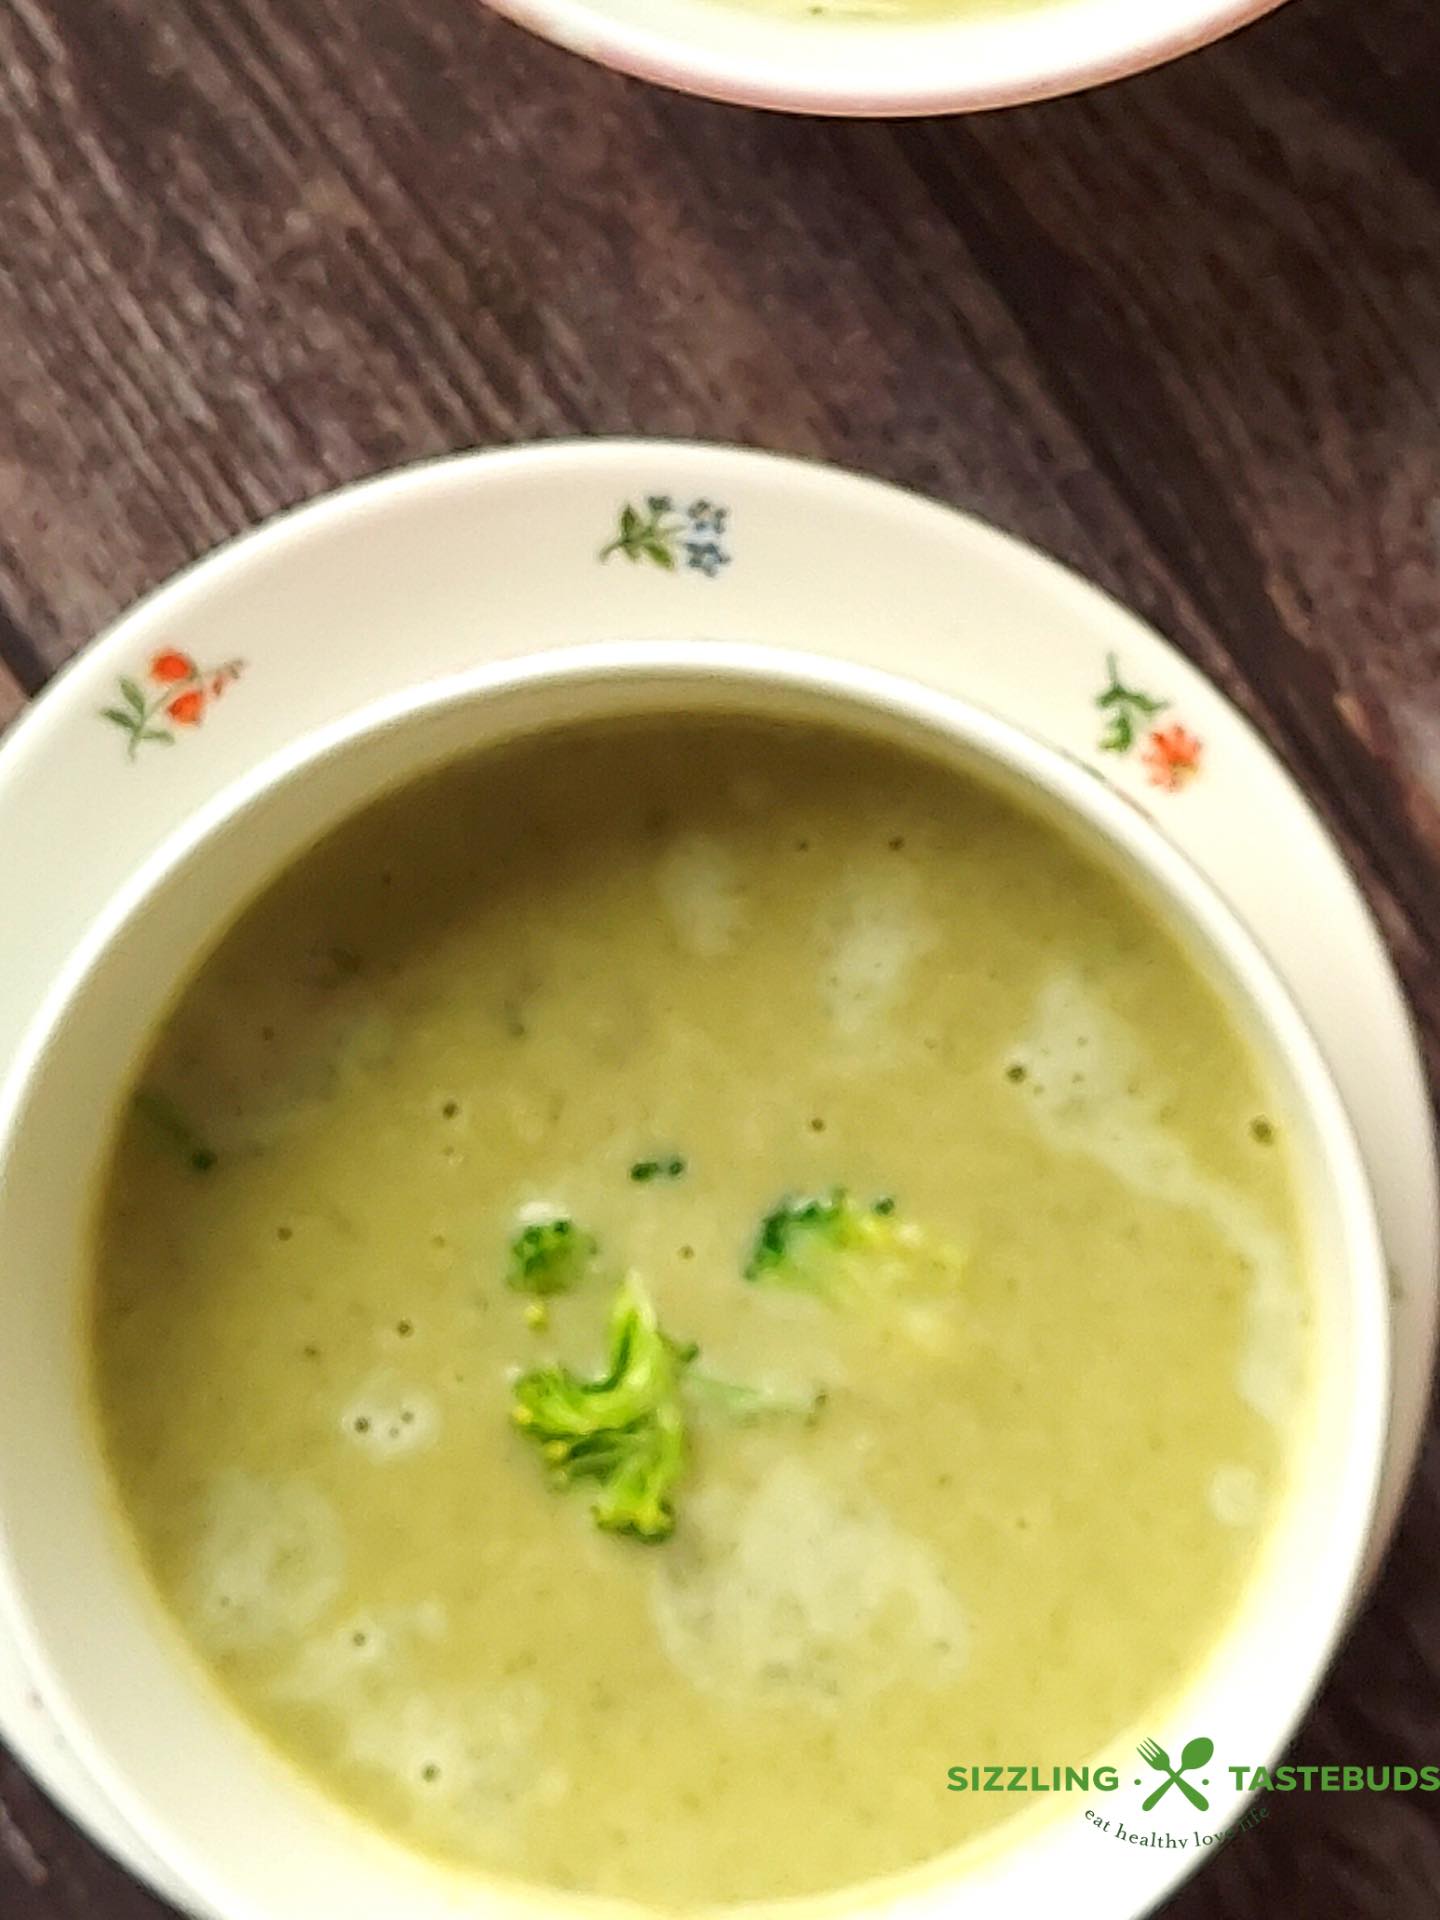 An Aromatic and delicious Winter Special Vegan Brocolli Soup with warming spices. Can be served as an appetiser or for brunch.